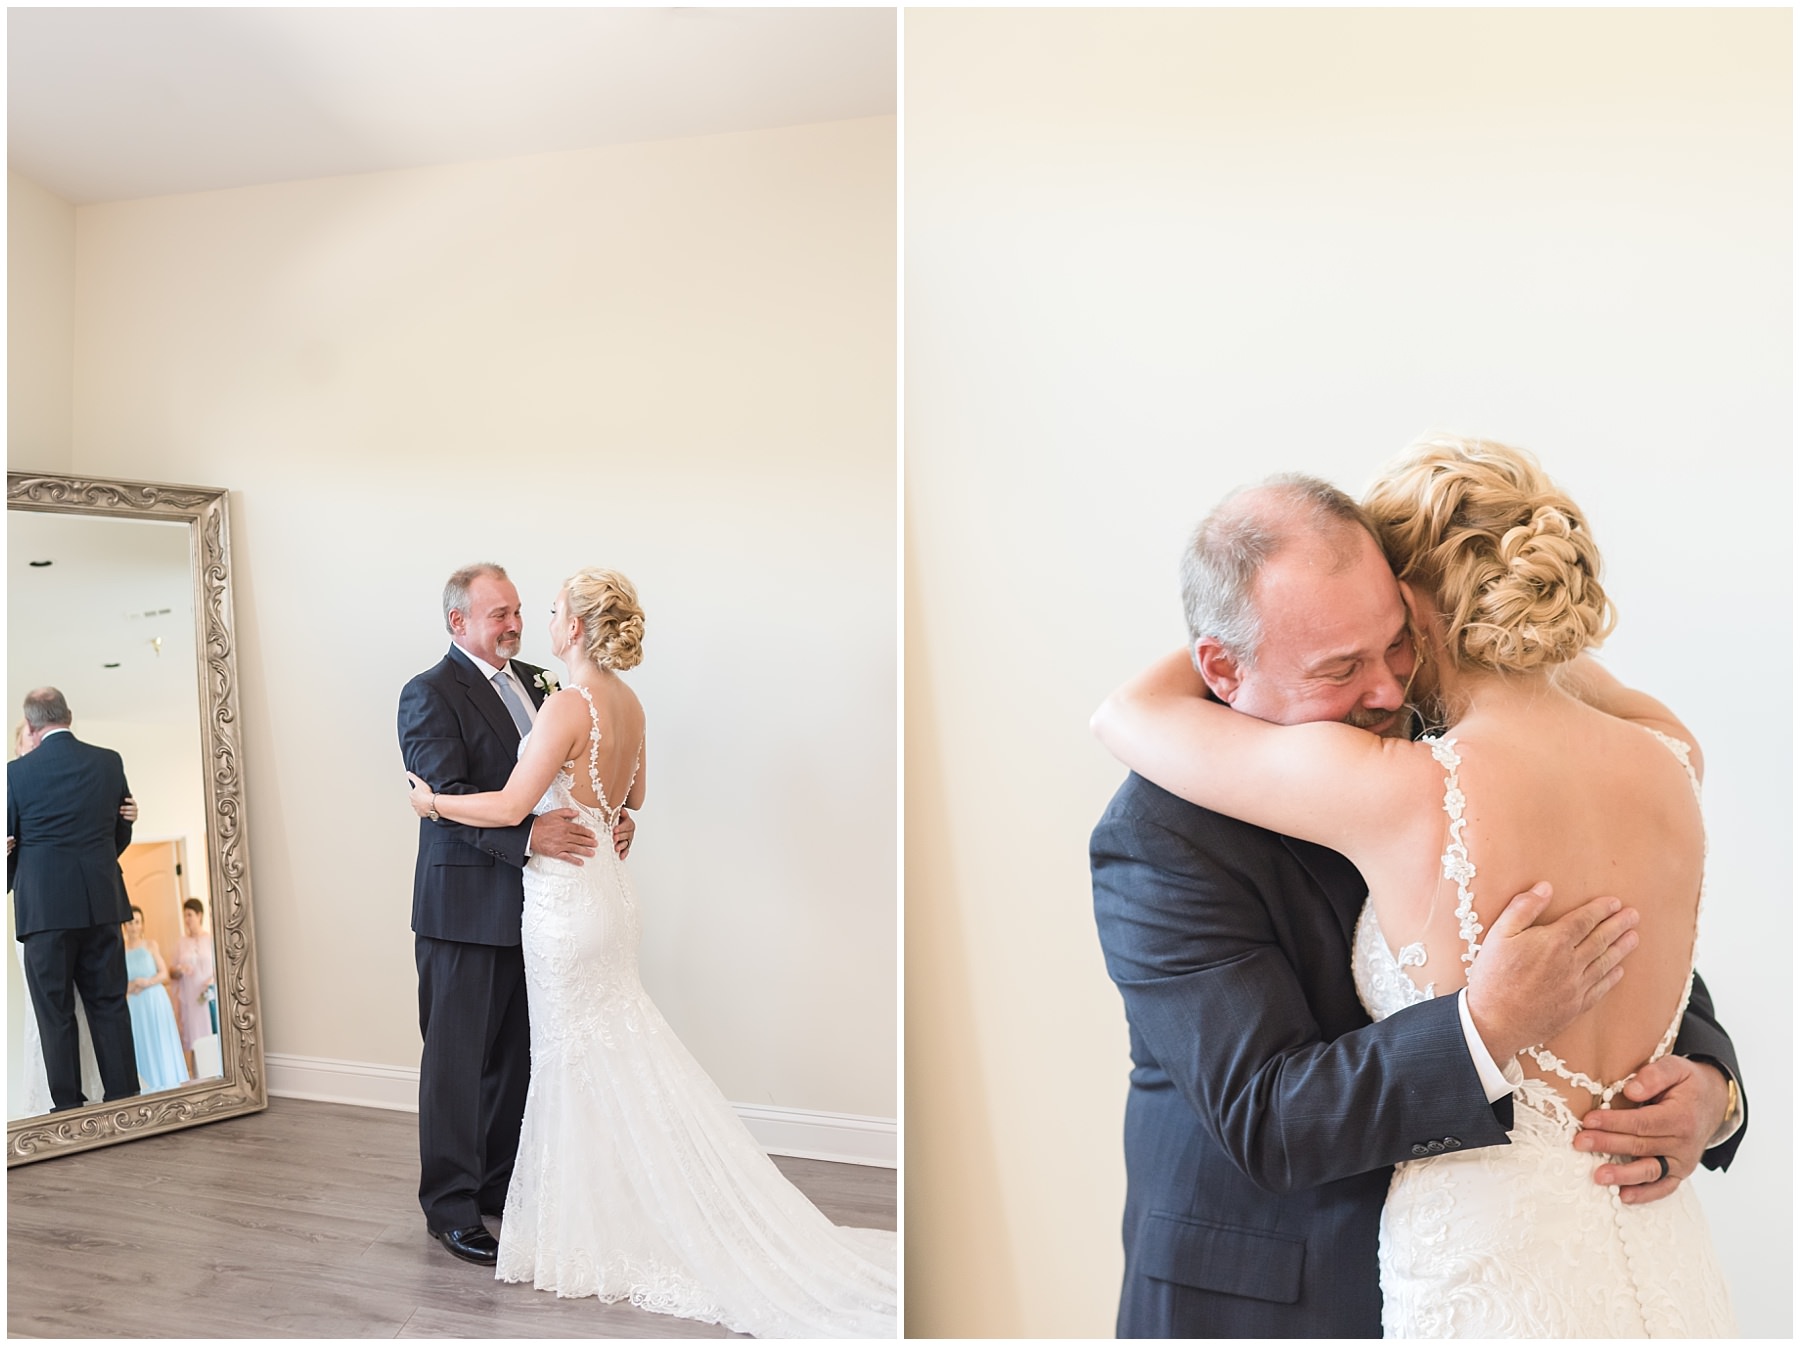 Bride's first look with her dad on her wedding day at Tucker's Gap Event Center